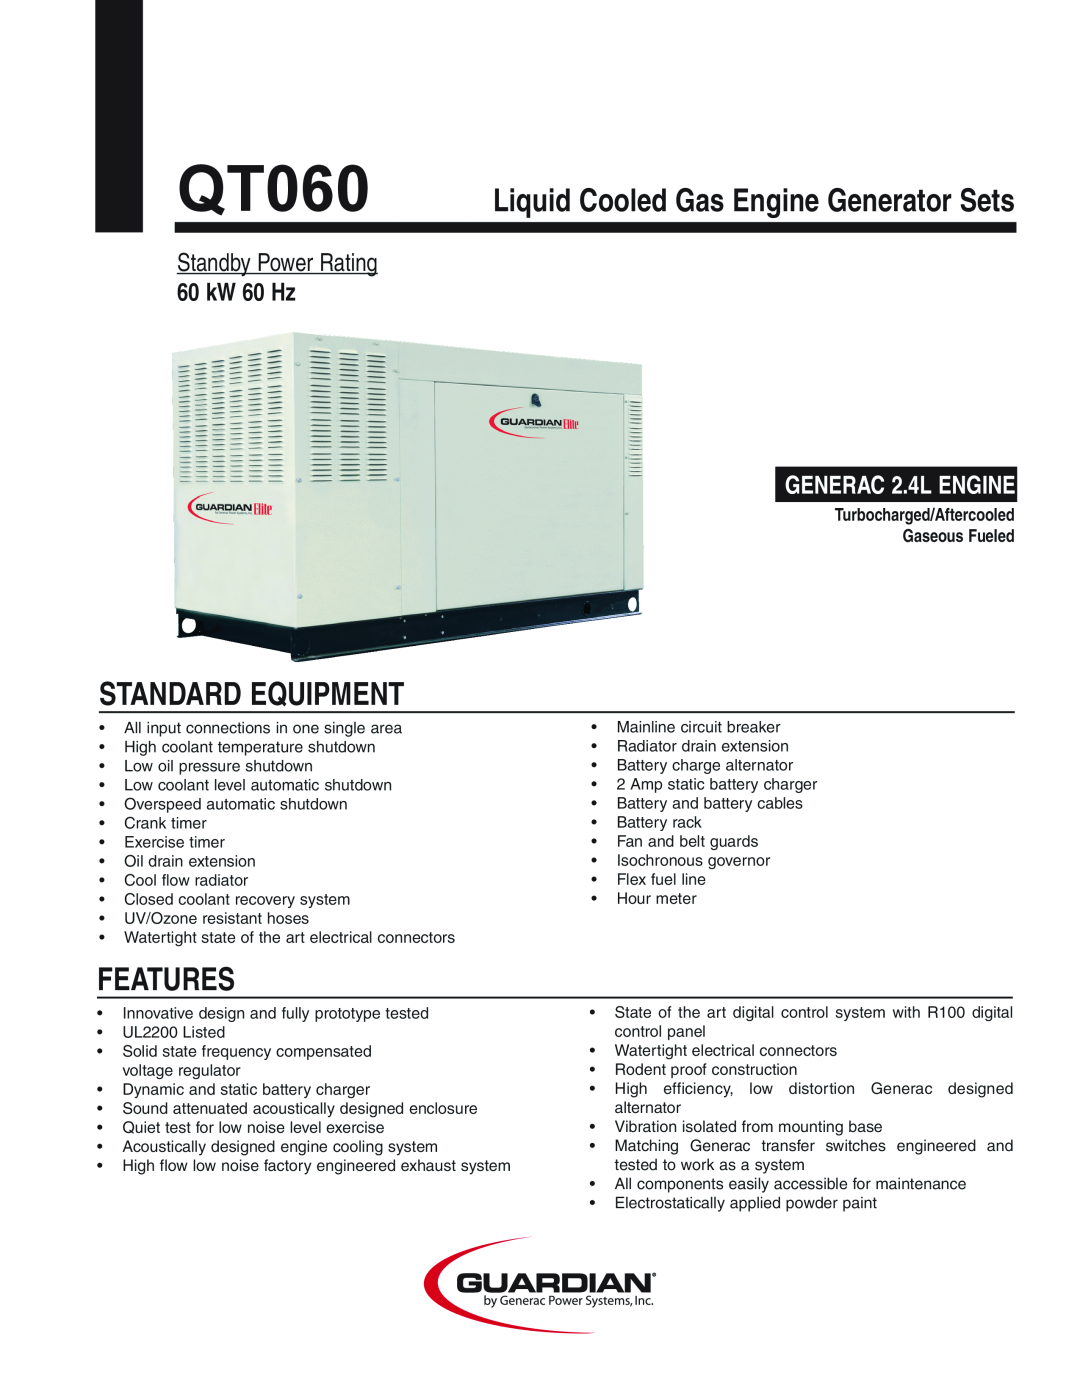 Guardian Technologies QT060 manual Standard Equipment, Features, Turbocharged/Aftercooled Gaseous Fueled, 60 kW 60 Hz 